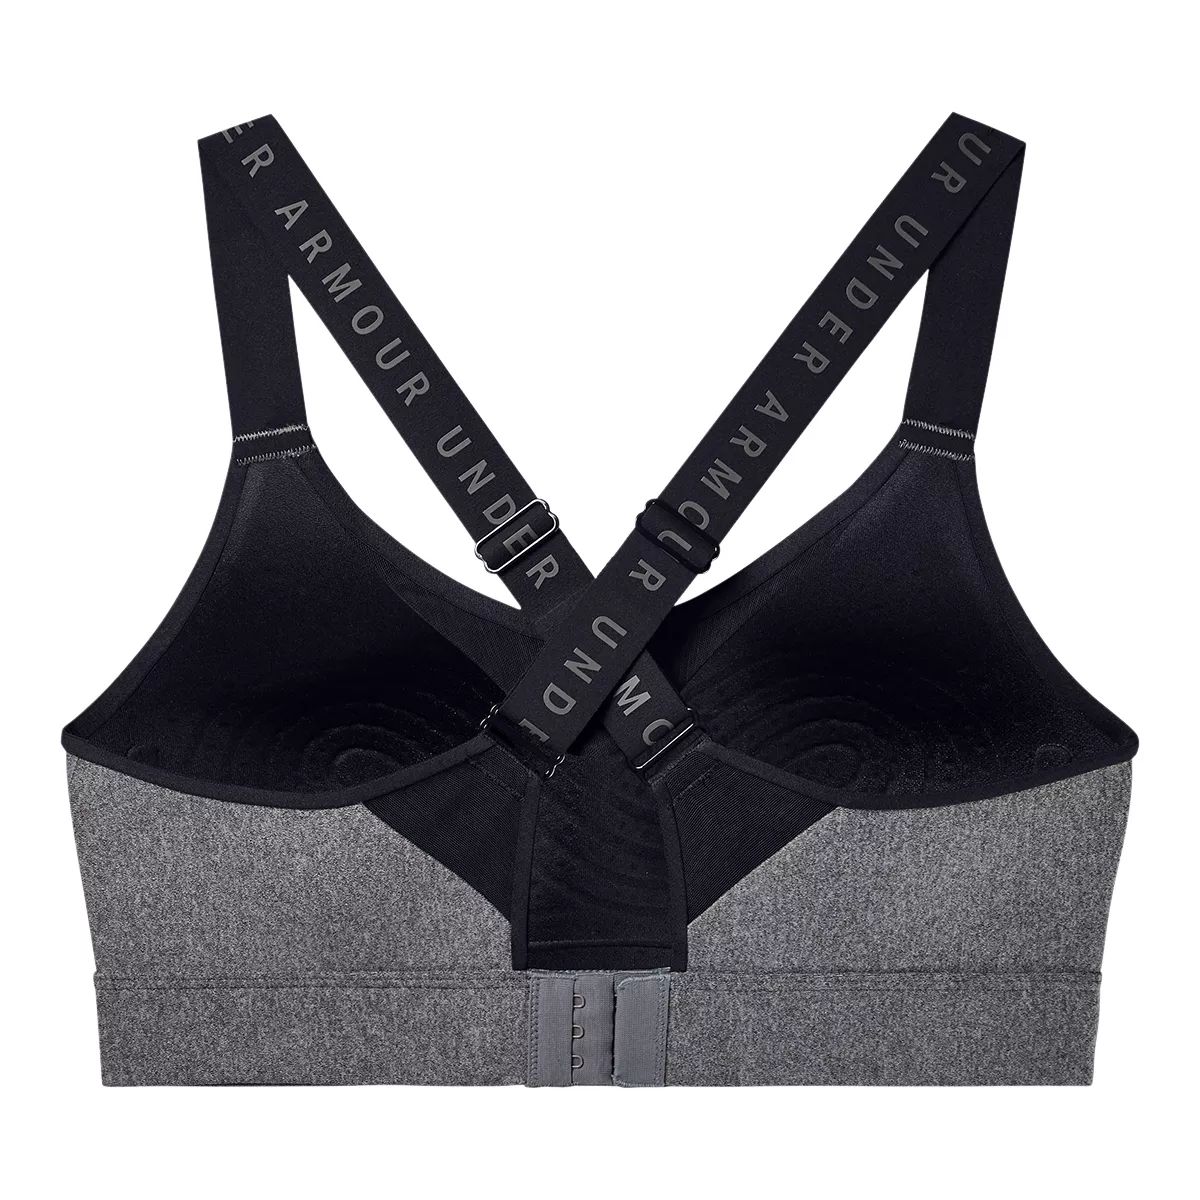 https://media-www.atmosphere.ca/product/div-03-softgoods/dpt-70-athletic-clothing/sdpt-02-womens/333187268/ua-w-tr-infinity-heather-high-charcoal-light-heather-xs--23296ed3-311a-4ba7-992b-779ef734f175-jpgrendition.jpg?imdensity=1&imwidth=1244&impolicy=mZoom